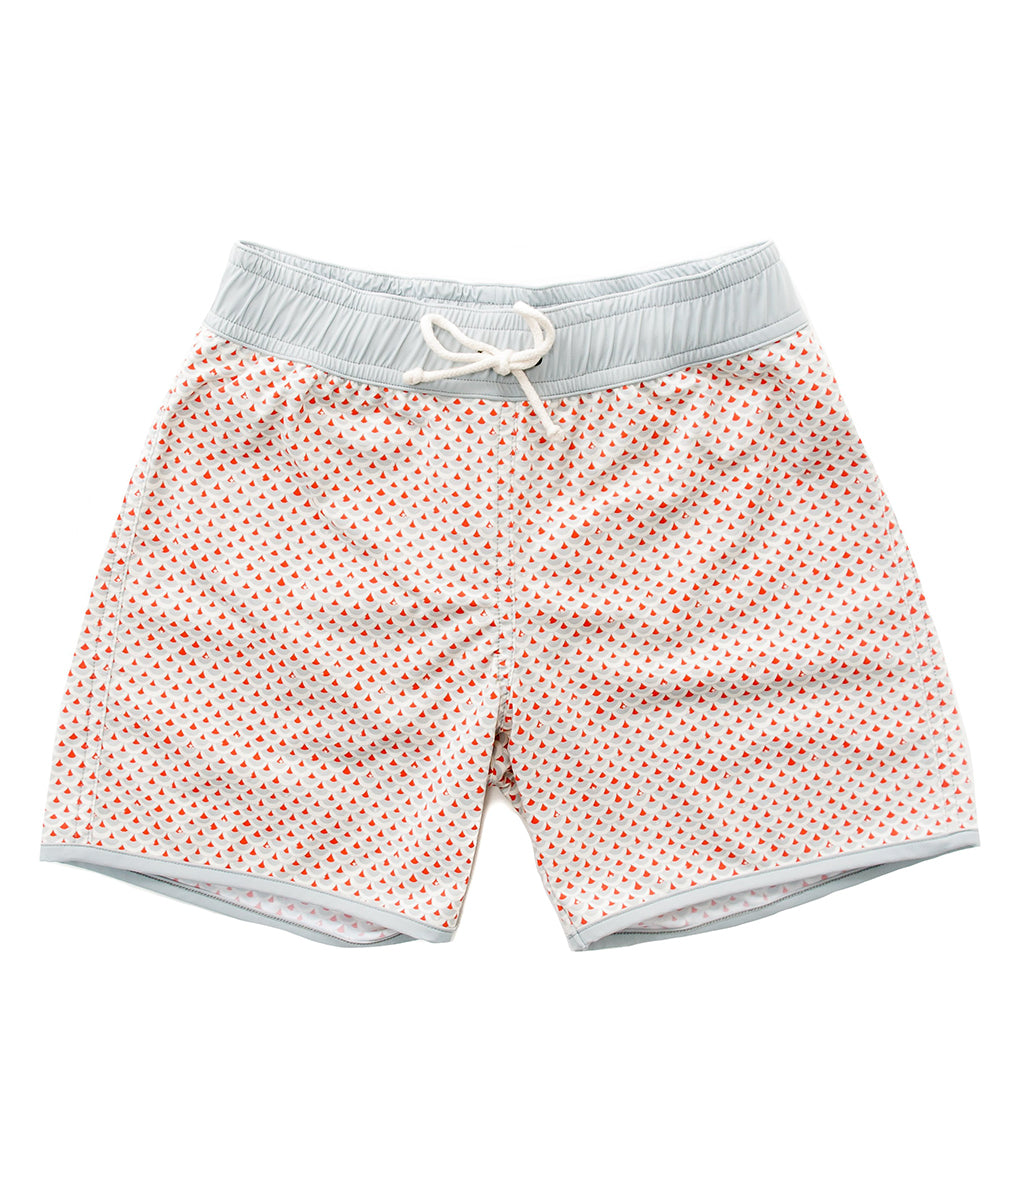 Swimshort Tommaso - Scales print in cloud grey and mandarinred